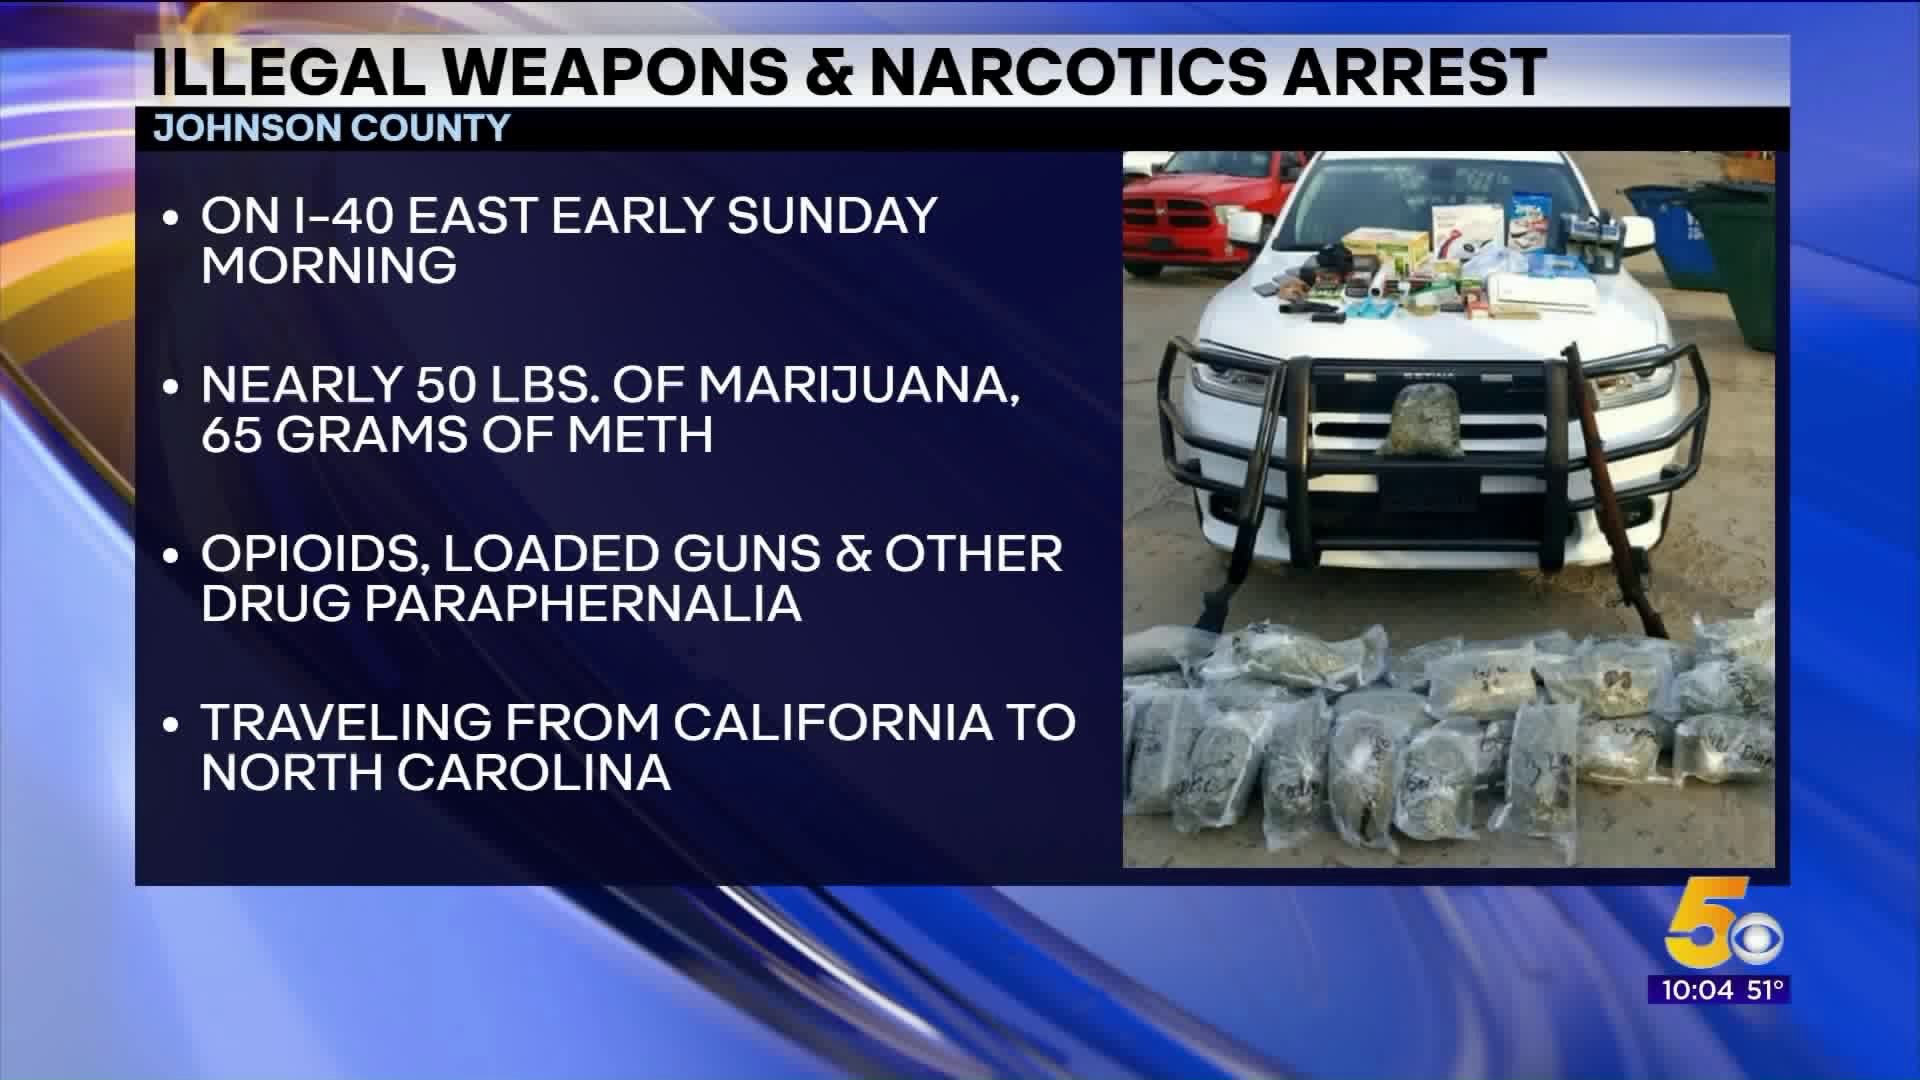 Man Arrested After 50 Pounds Of Marijuana, Meth And Firearms Found In Vehicle In Johnson County